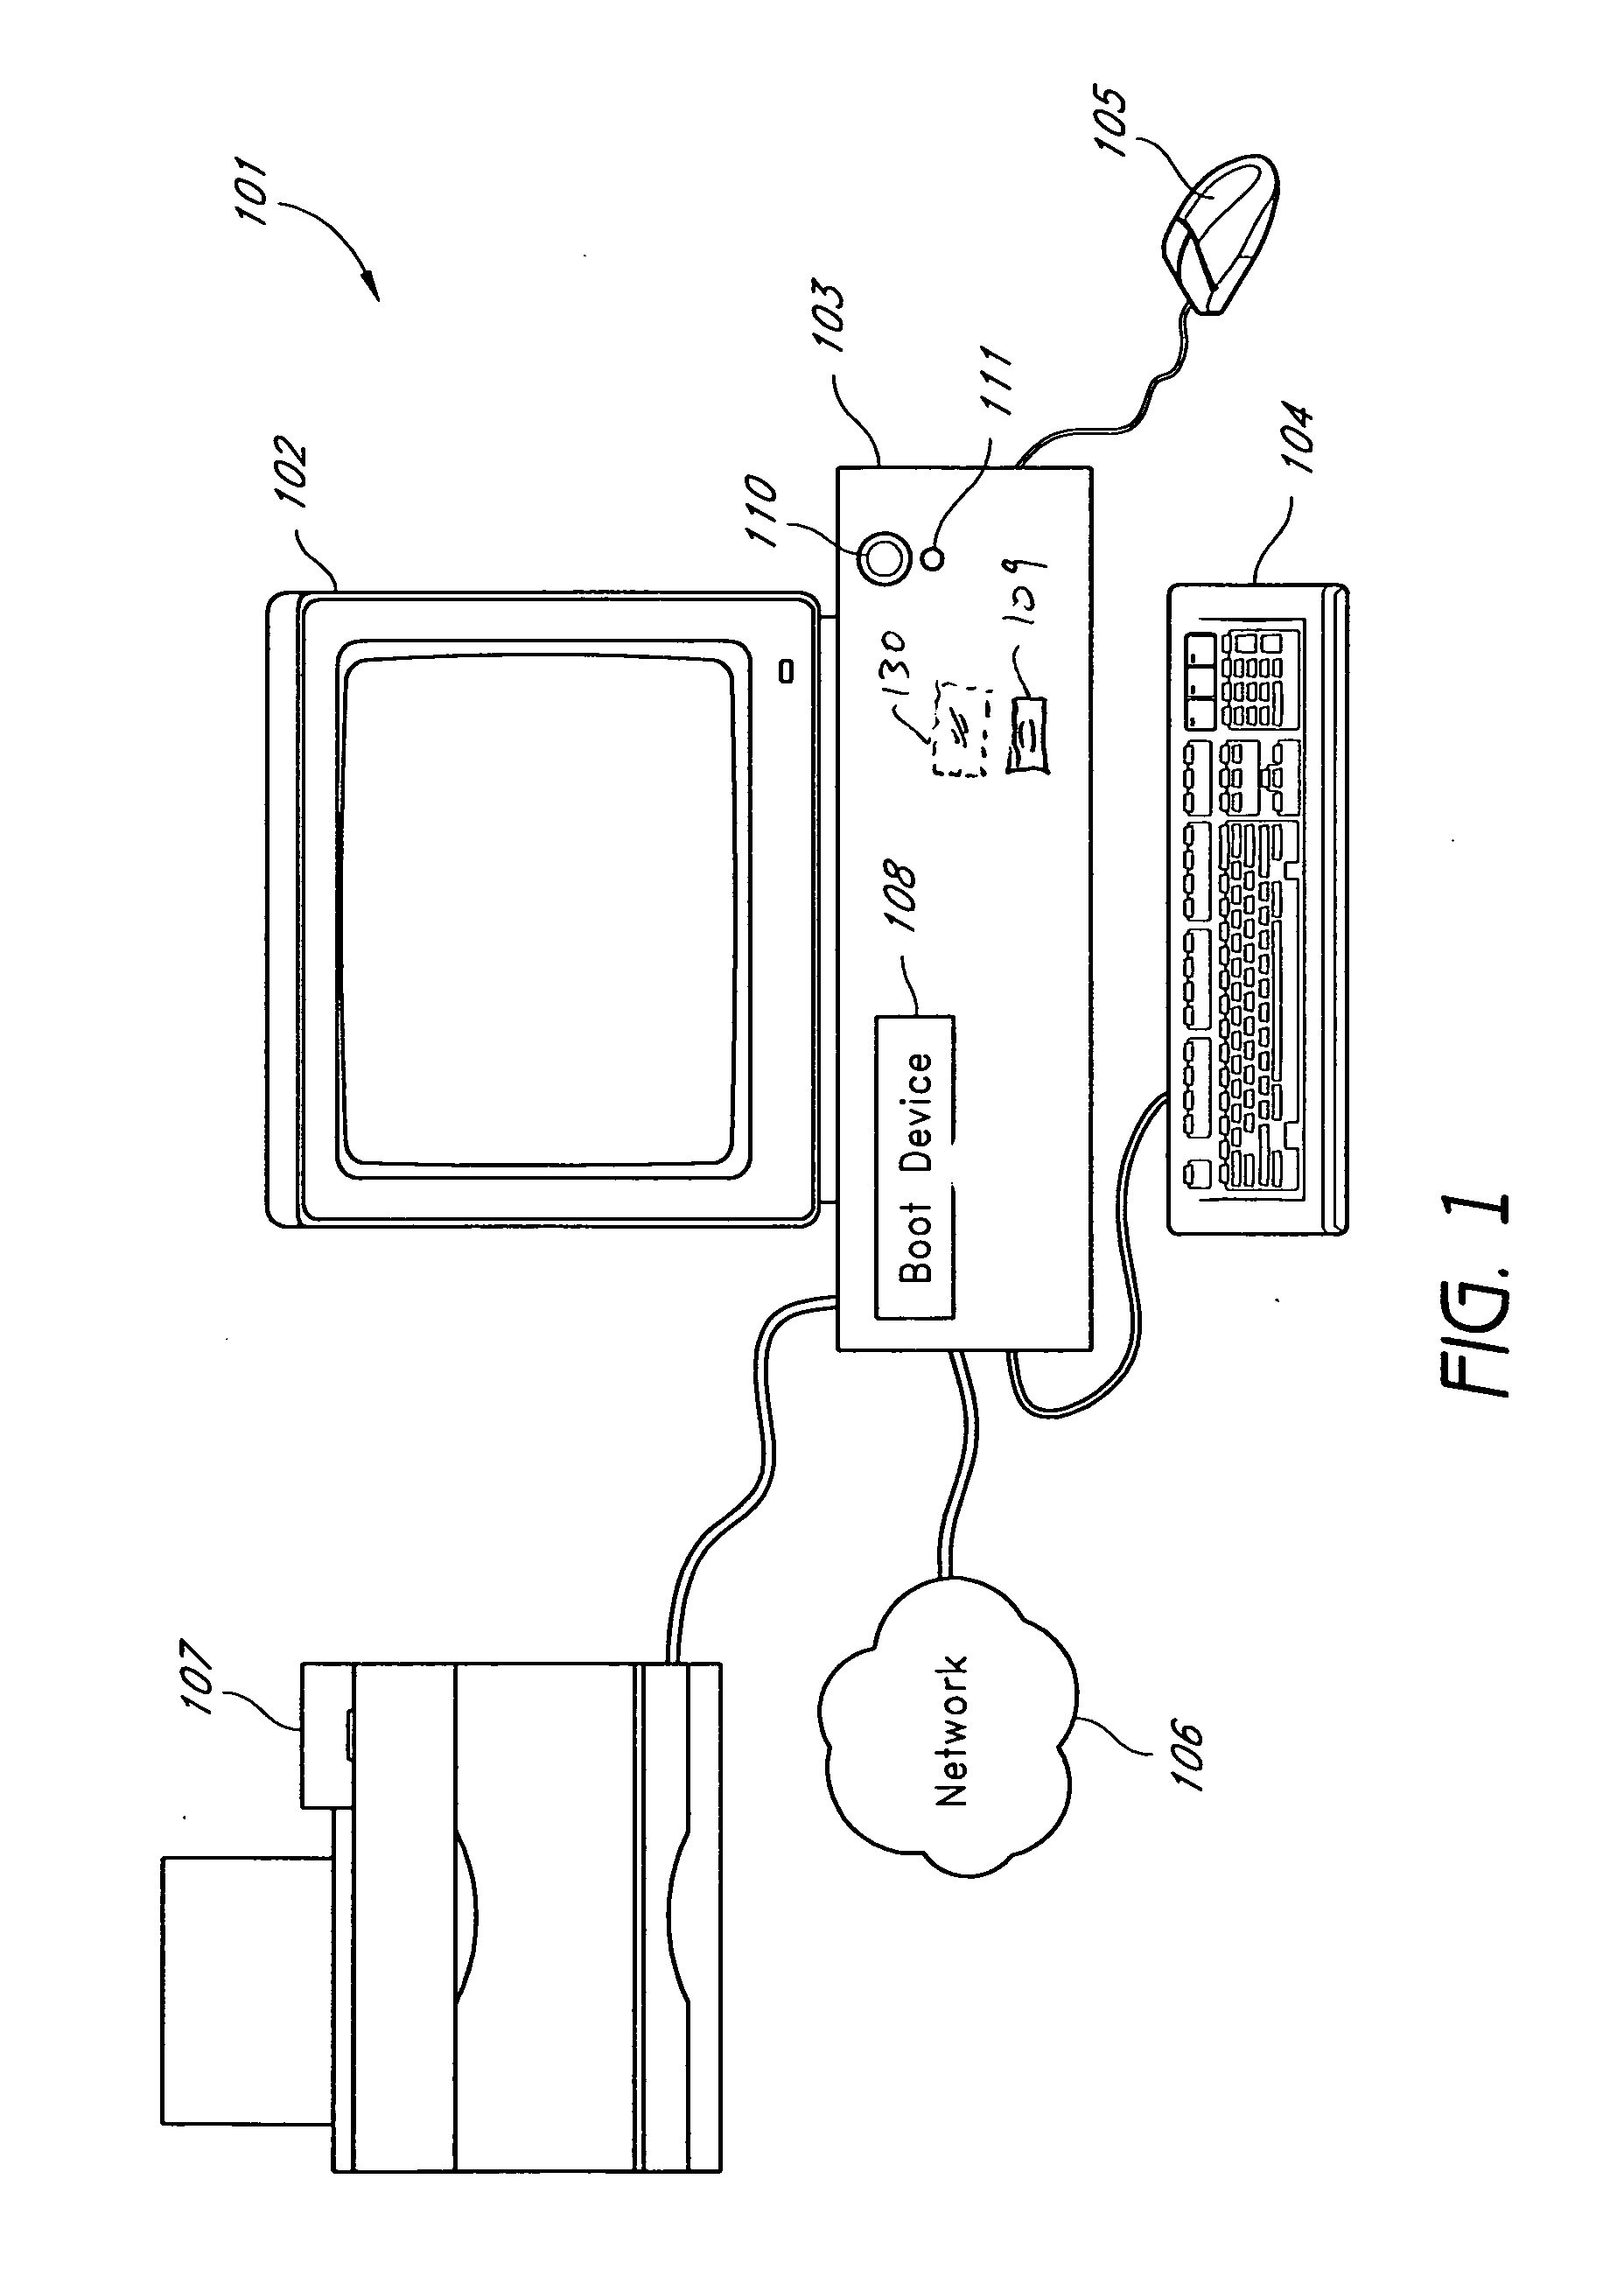 Virus-resistant computer with data interface for filtering data